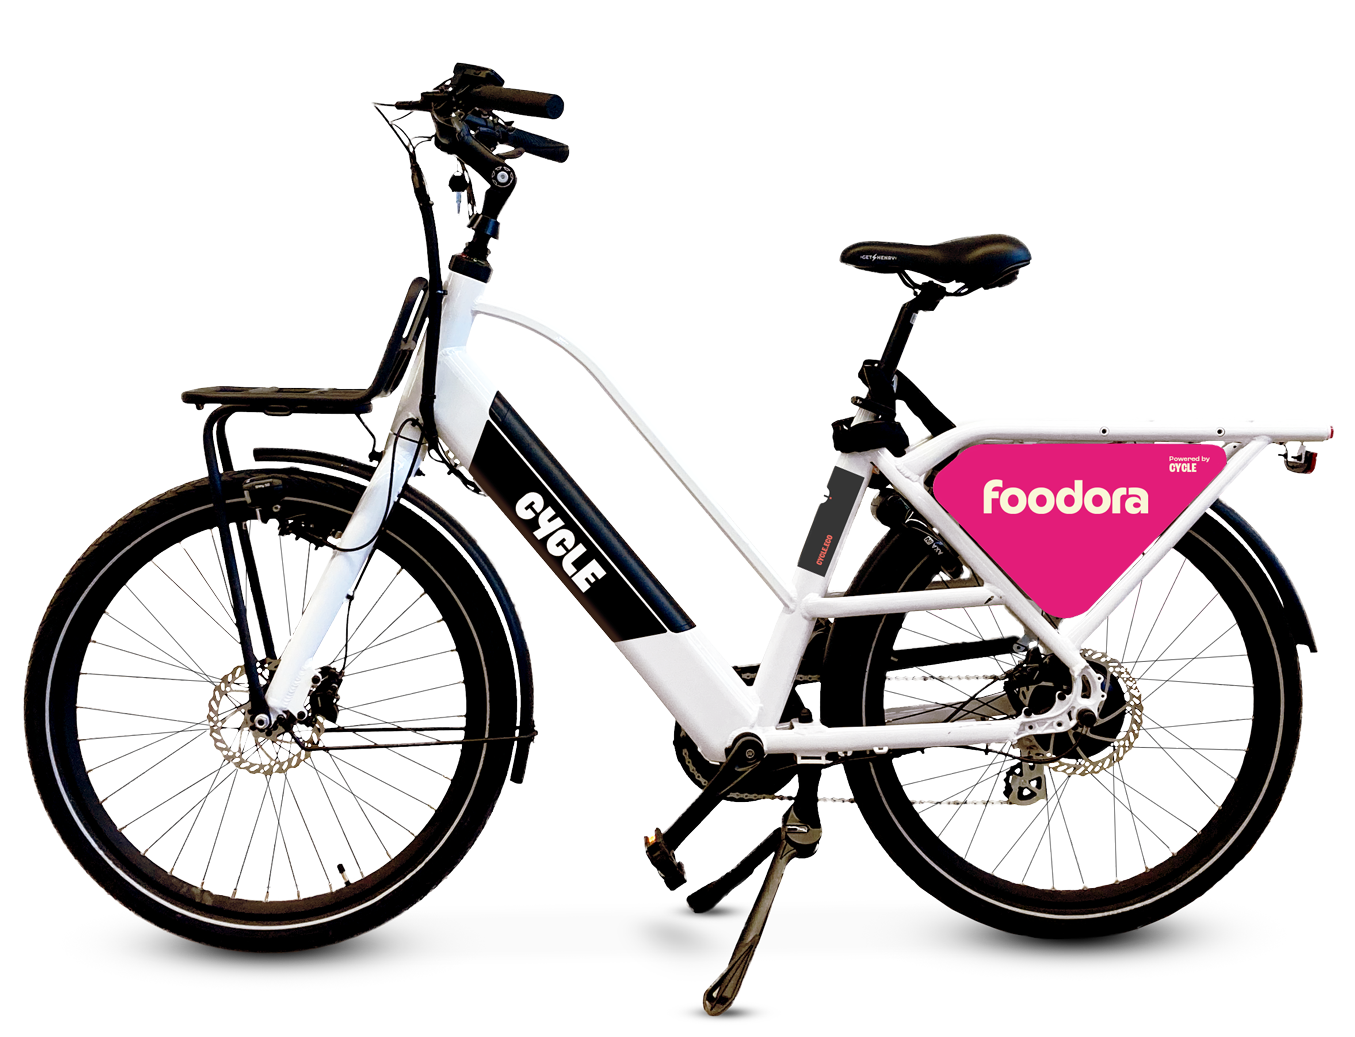 CYCLE One with foodora panels